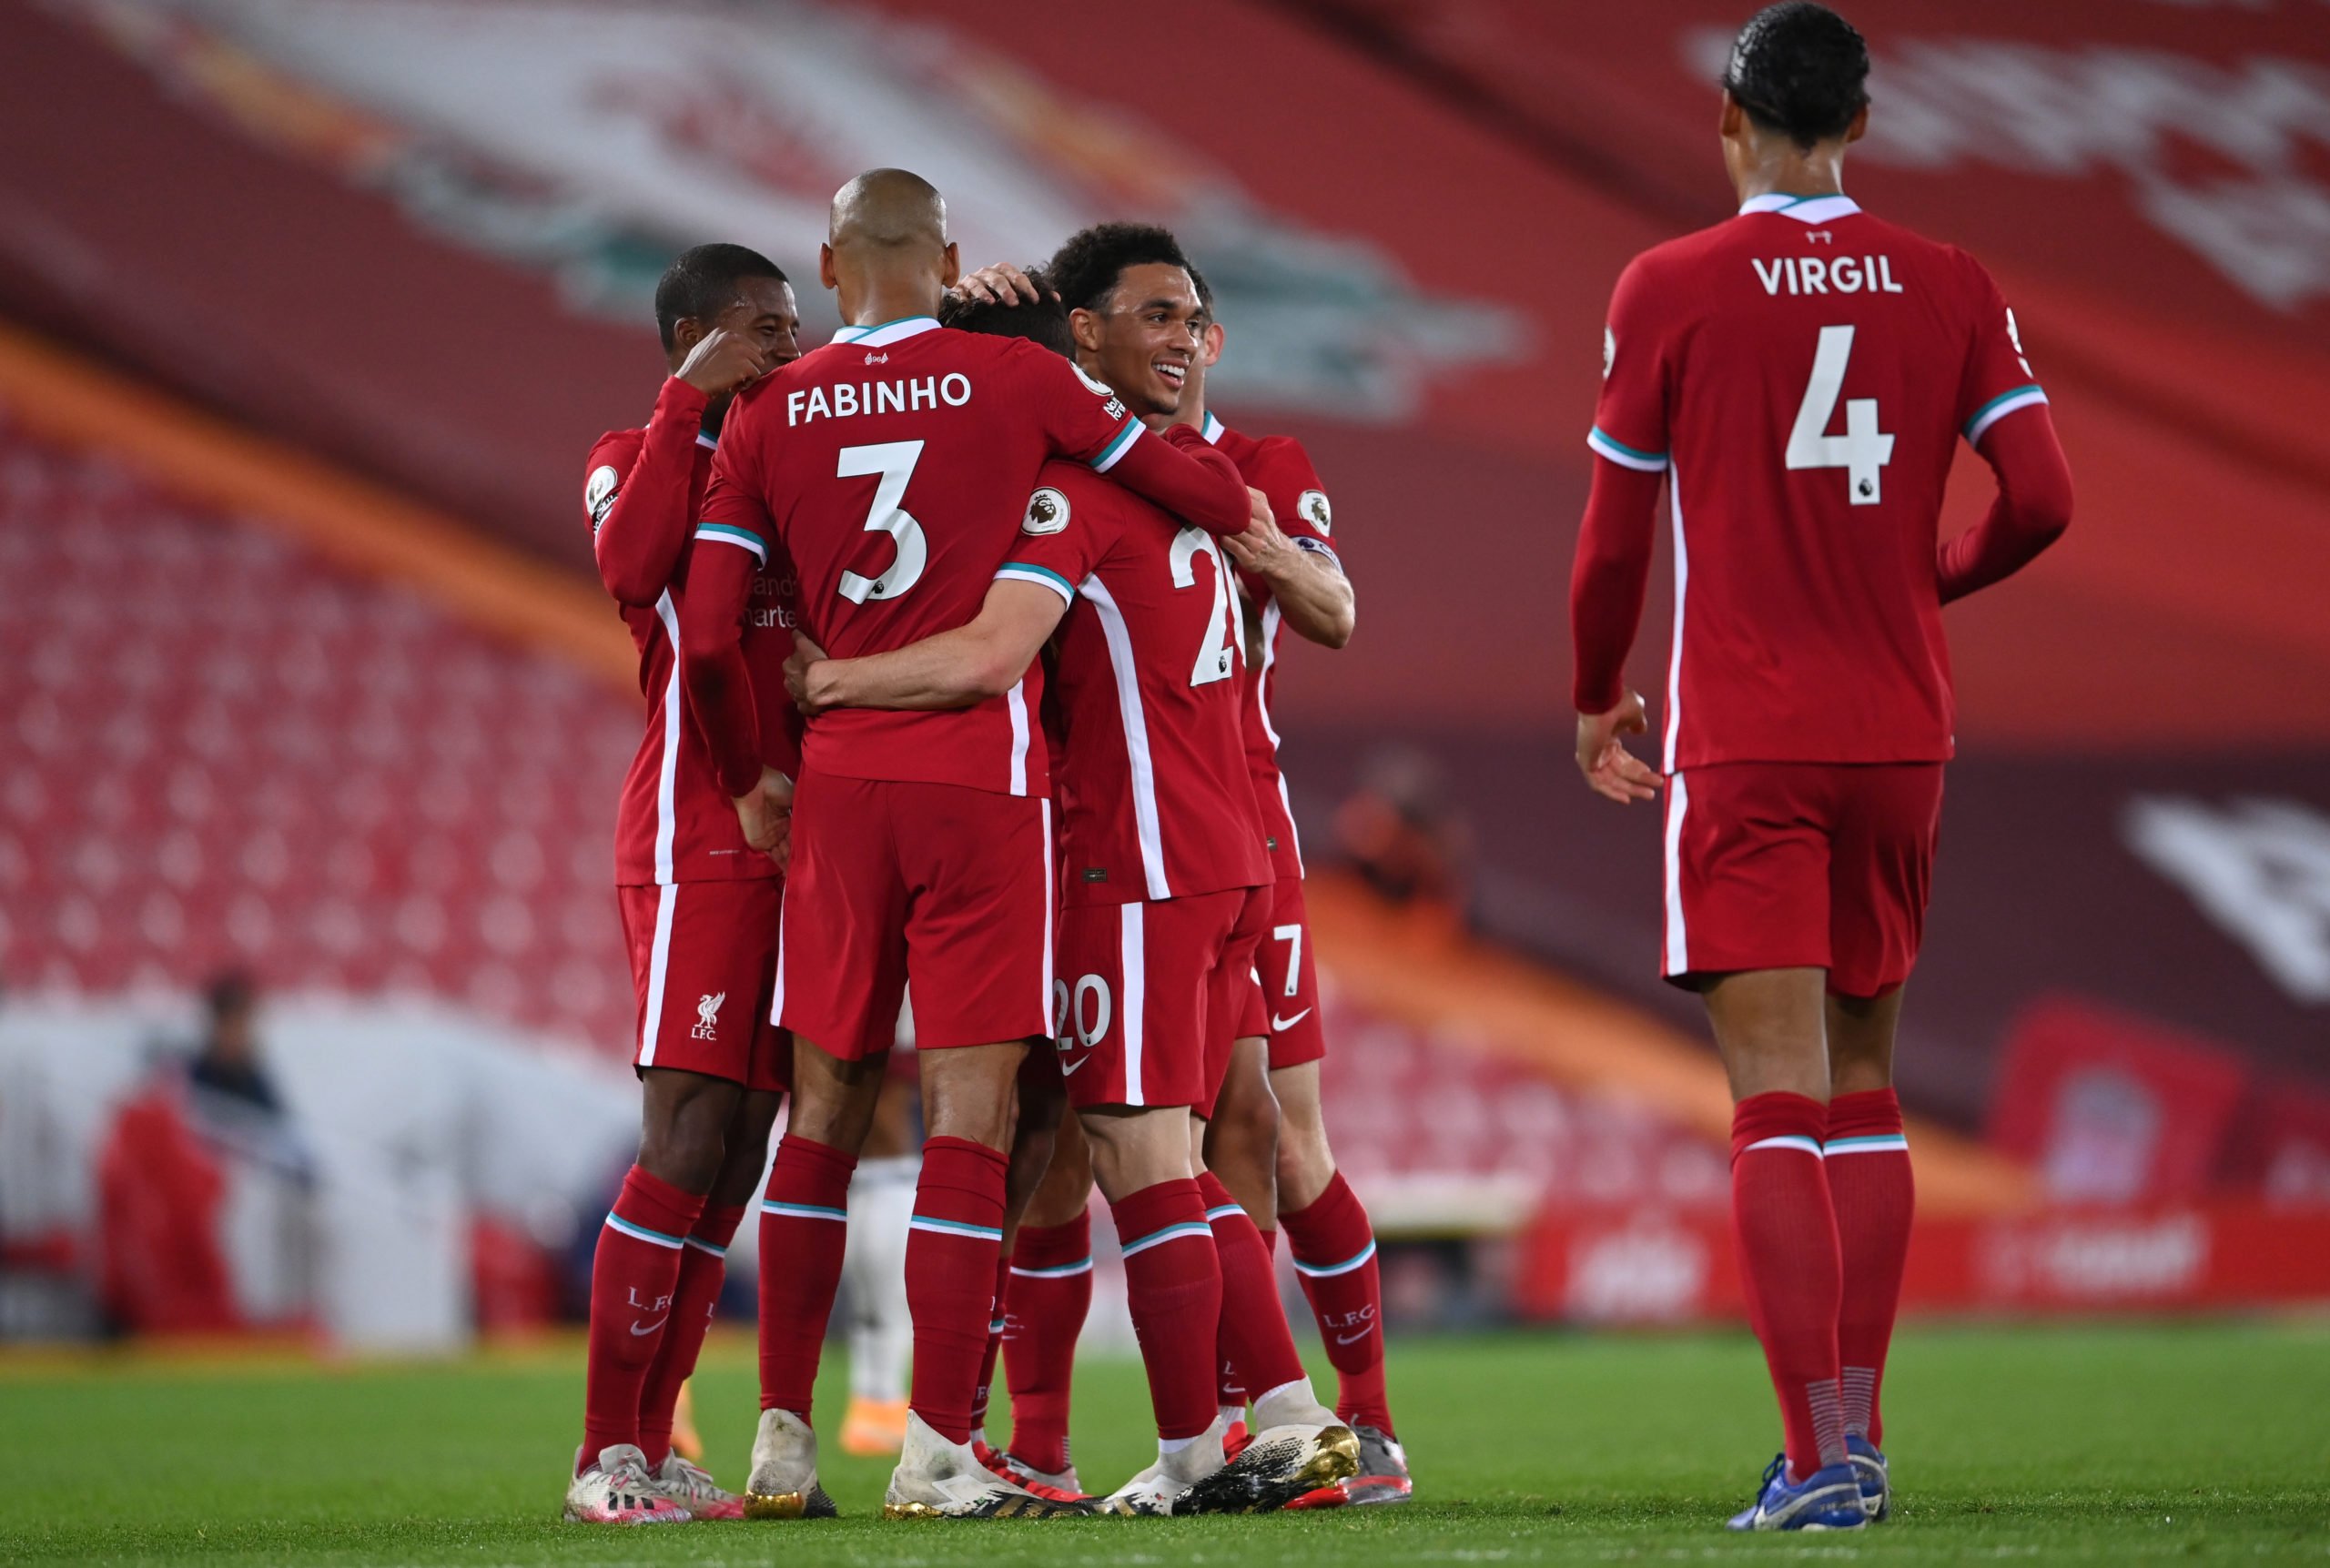 LIVERPOOL, ENGLAND - SEPTEMBER 28: Diogo Jota of Liverpool celebrates with teammates after scoring his sides third goal during the Premier League match between Liverpool and Arsenal at Anfield on September 28, 2020 in Liverpool, England. Sporting stadiums around the UK remain under strict restrictions due to the Coronavirus Pandemic as Government social distancing laws prohibit fans inside venues resulting in games being played behind closed doors. (Photo by Laurence Griffiths/Getty Images)The 4th Official uses images provided by the following image agency: Getty Images (https://www.gettyimages.de/) Imago Images (https://www.imago-images.de/)